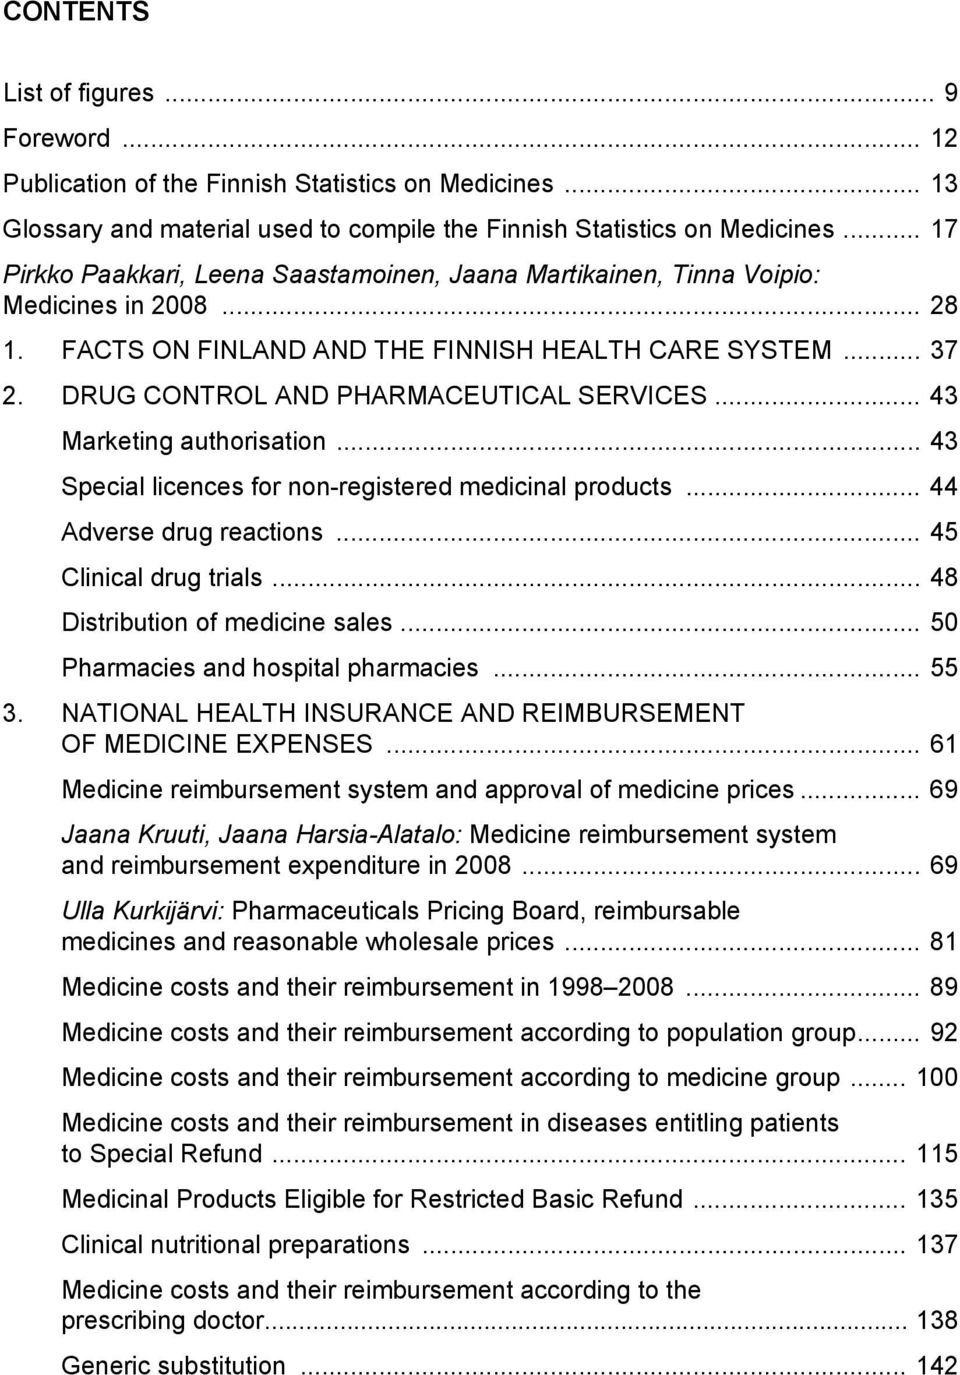 DRUG CONTROL AND PHARMACEUTICAL SERVICES... 43 Marketing authorisation... 43 Special licences for non-registered medicinal products... 44 Adverse drug reactions... 45 Clinical drug trials.